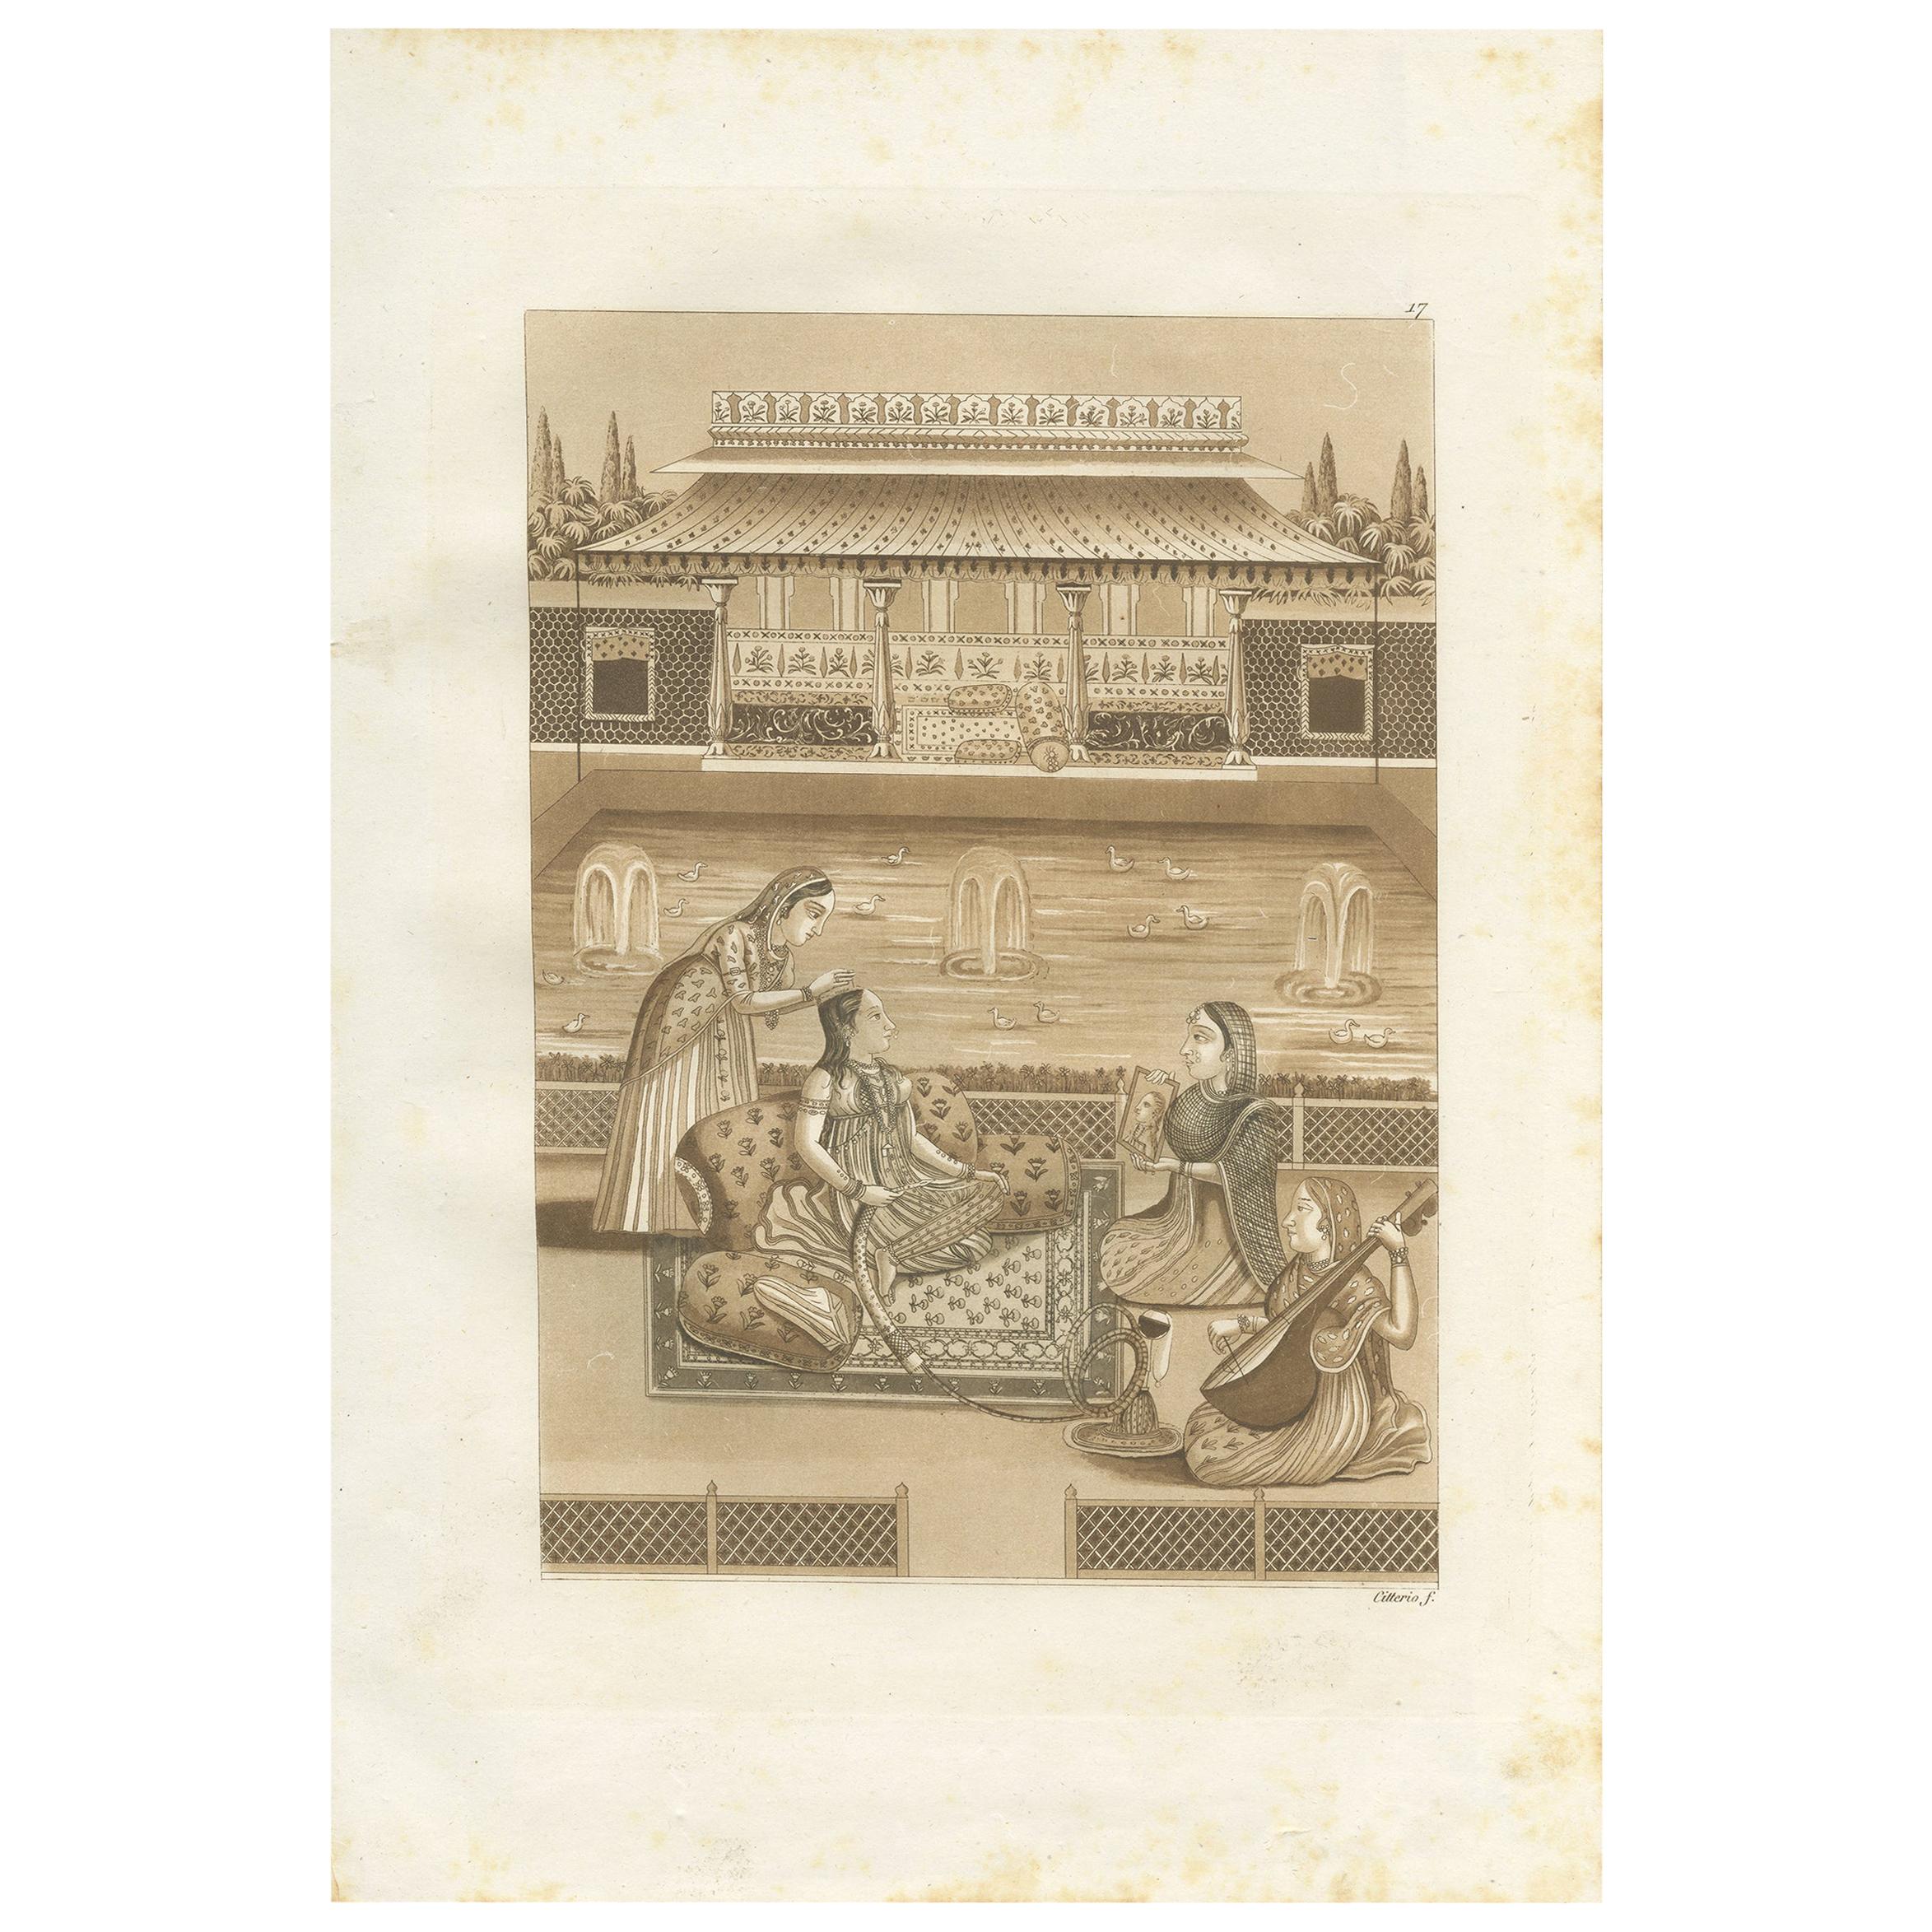 Antique Print of an Indian Princess by Ferrario, '1831'